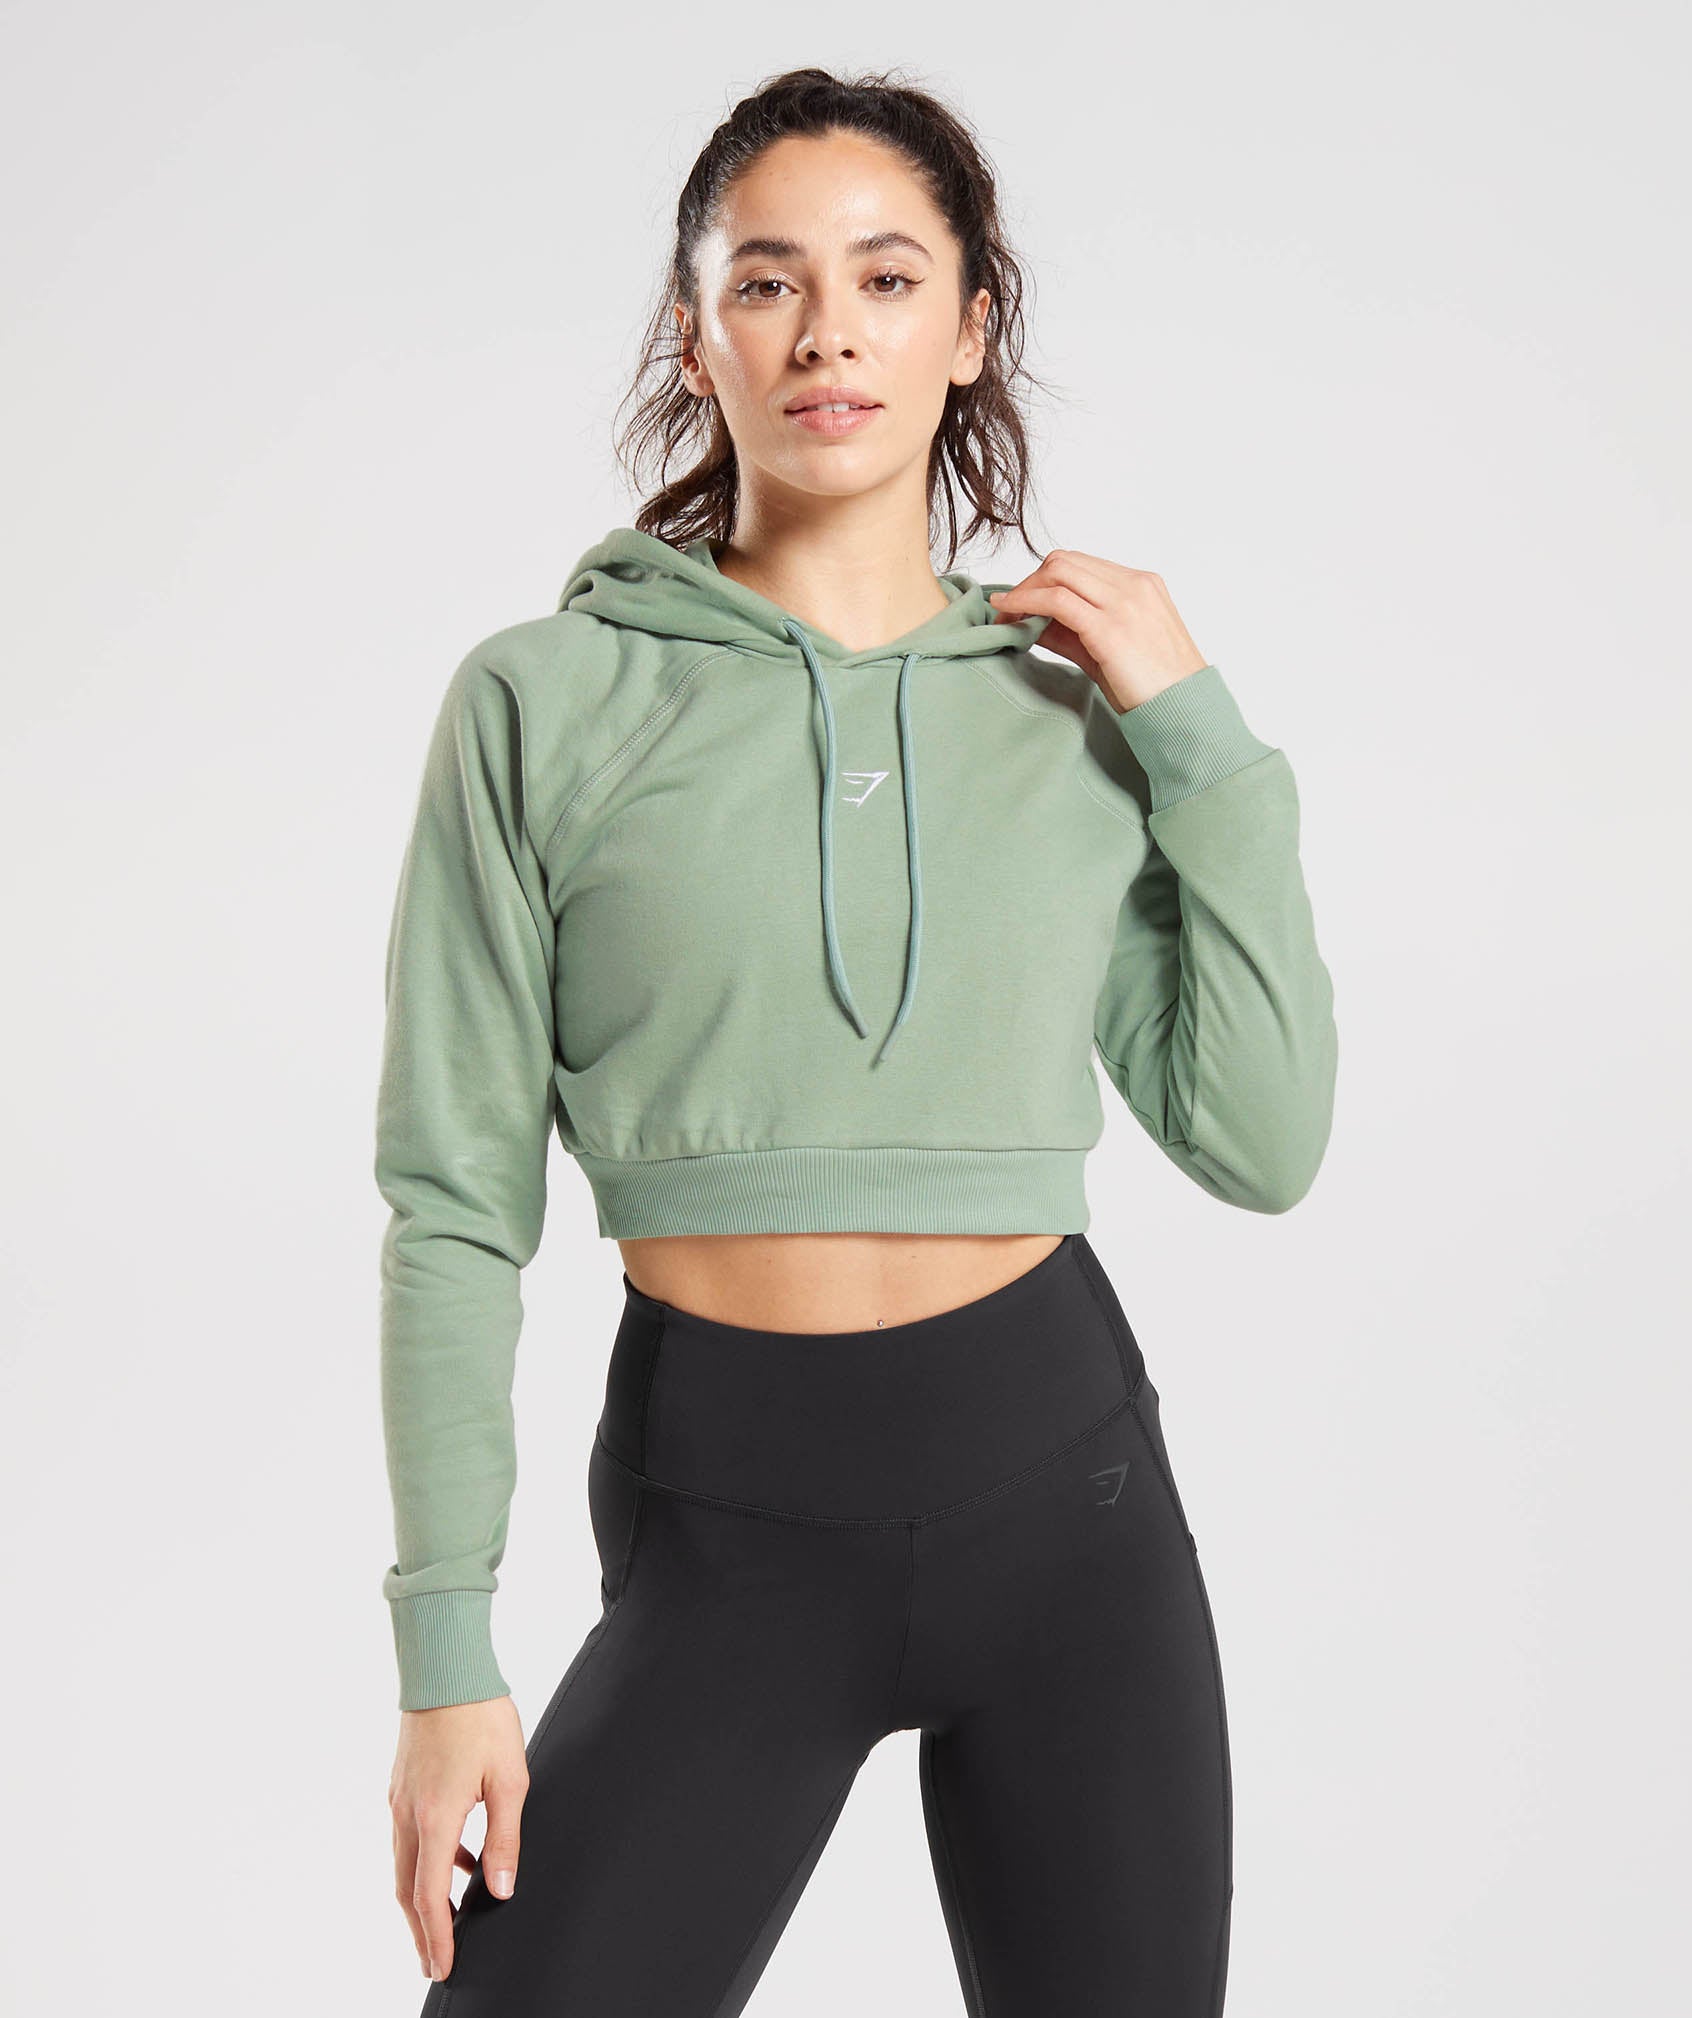 Cropped Hoodies for Women, Cropped Gym Hoodies